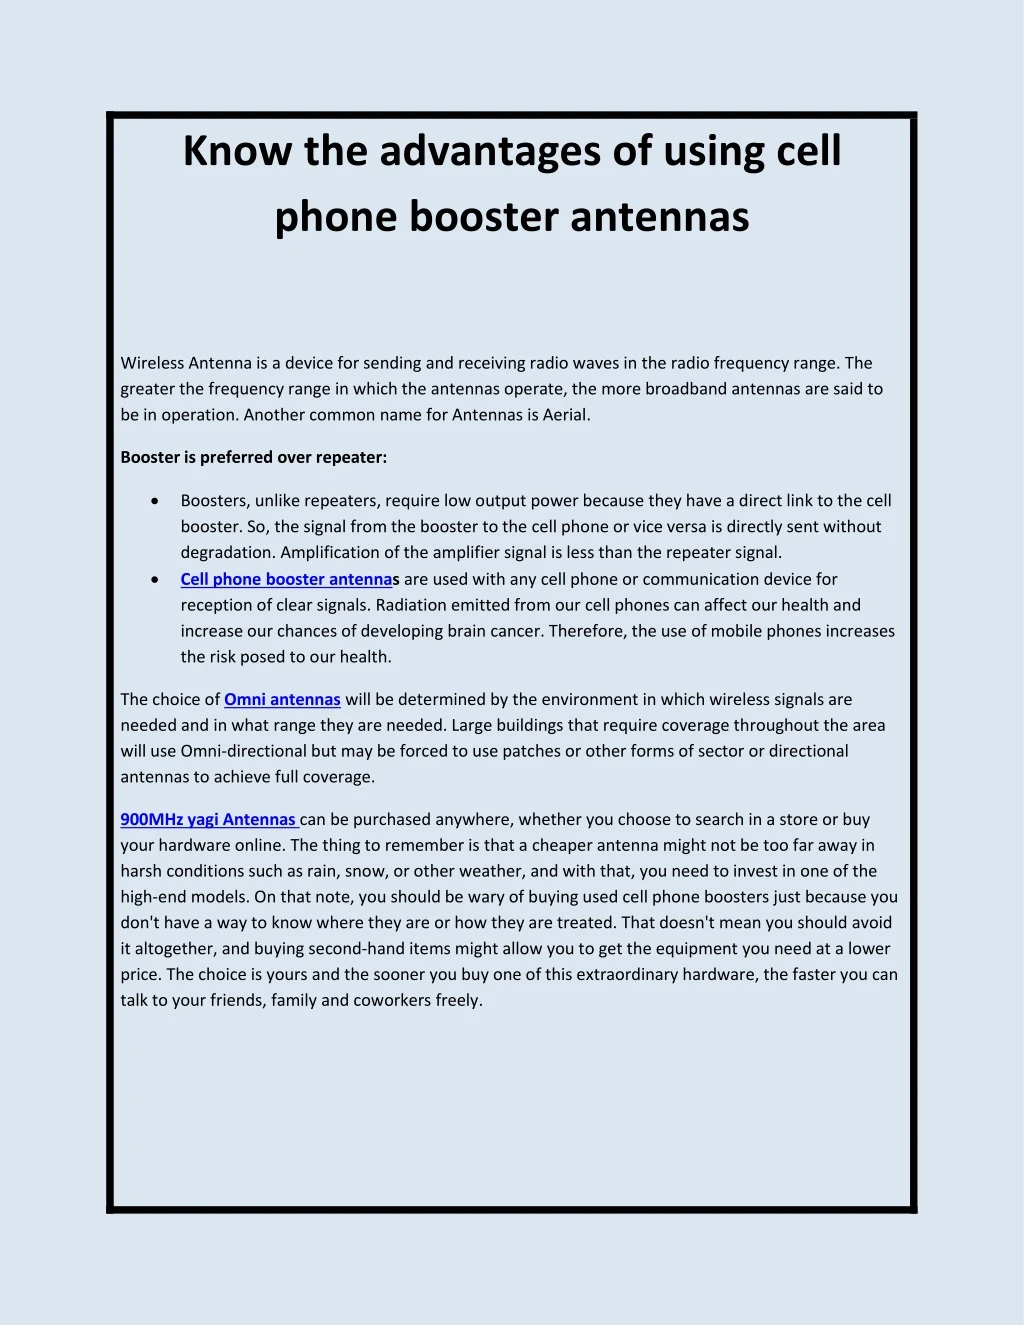 know the advantages of using cell phone booster